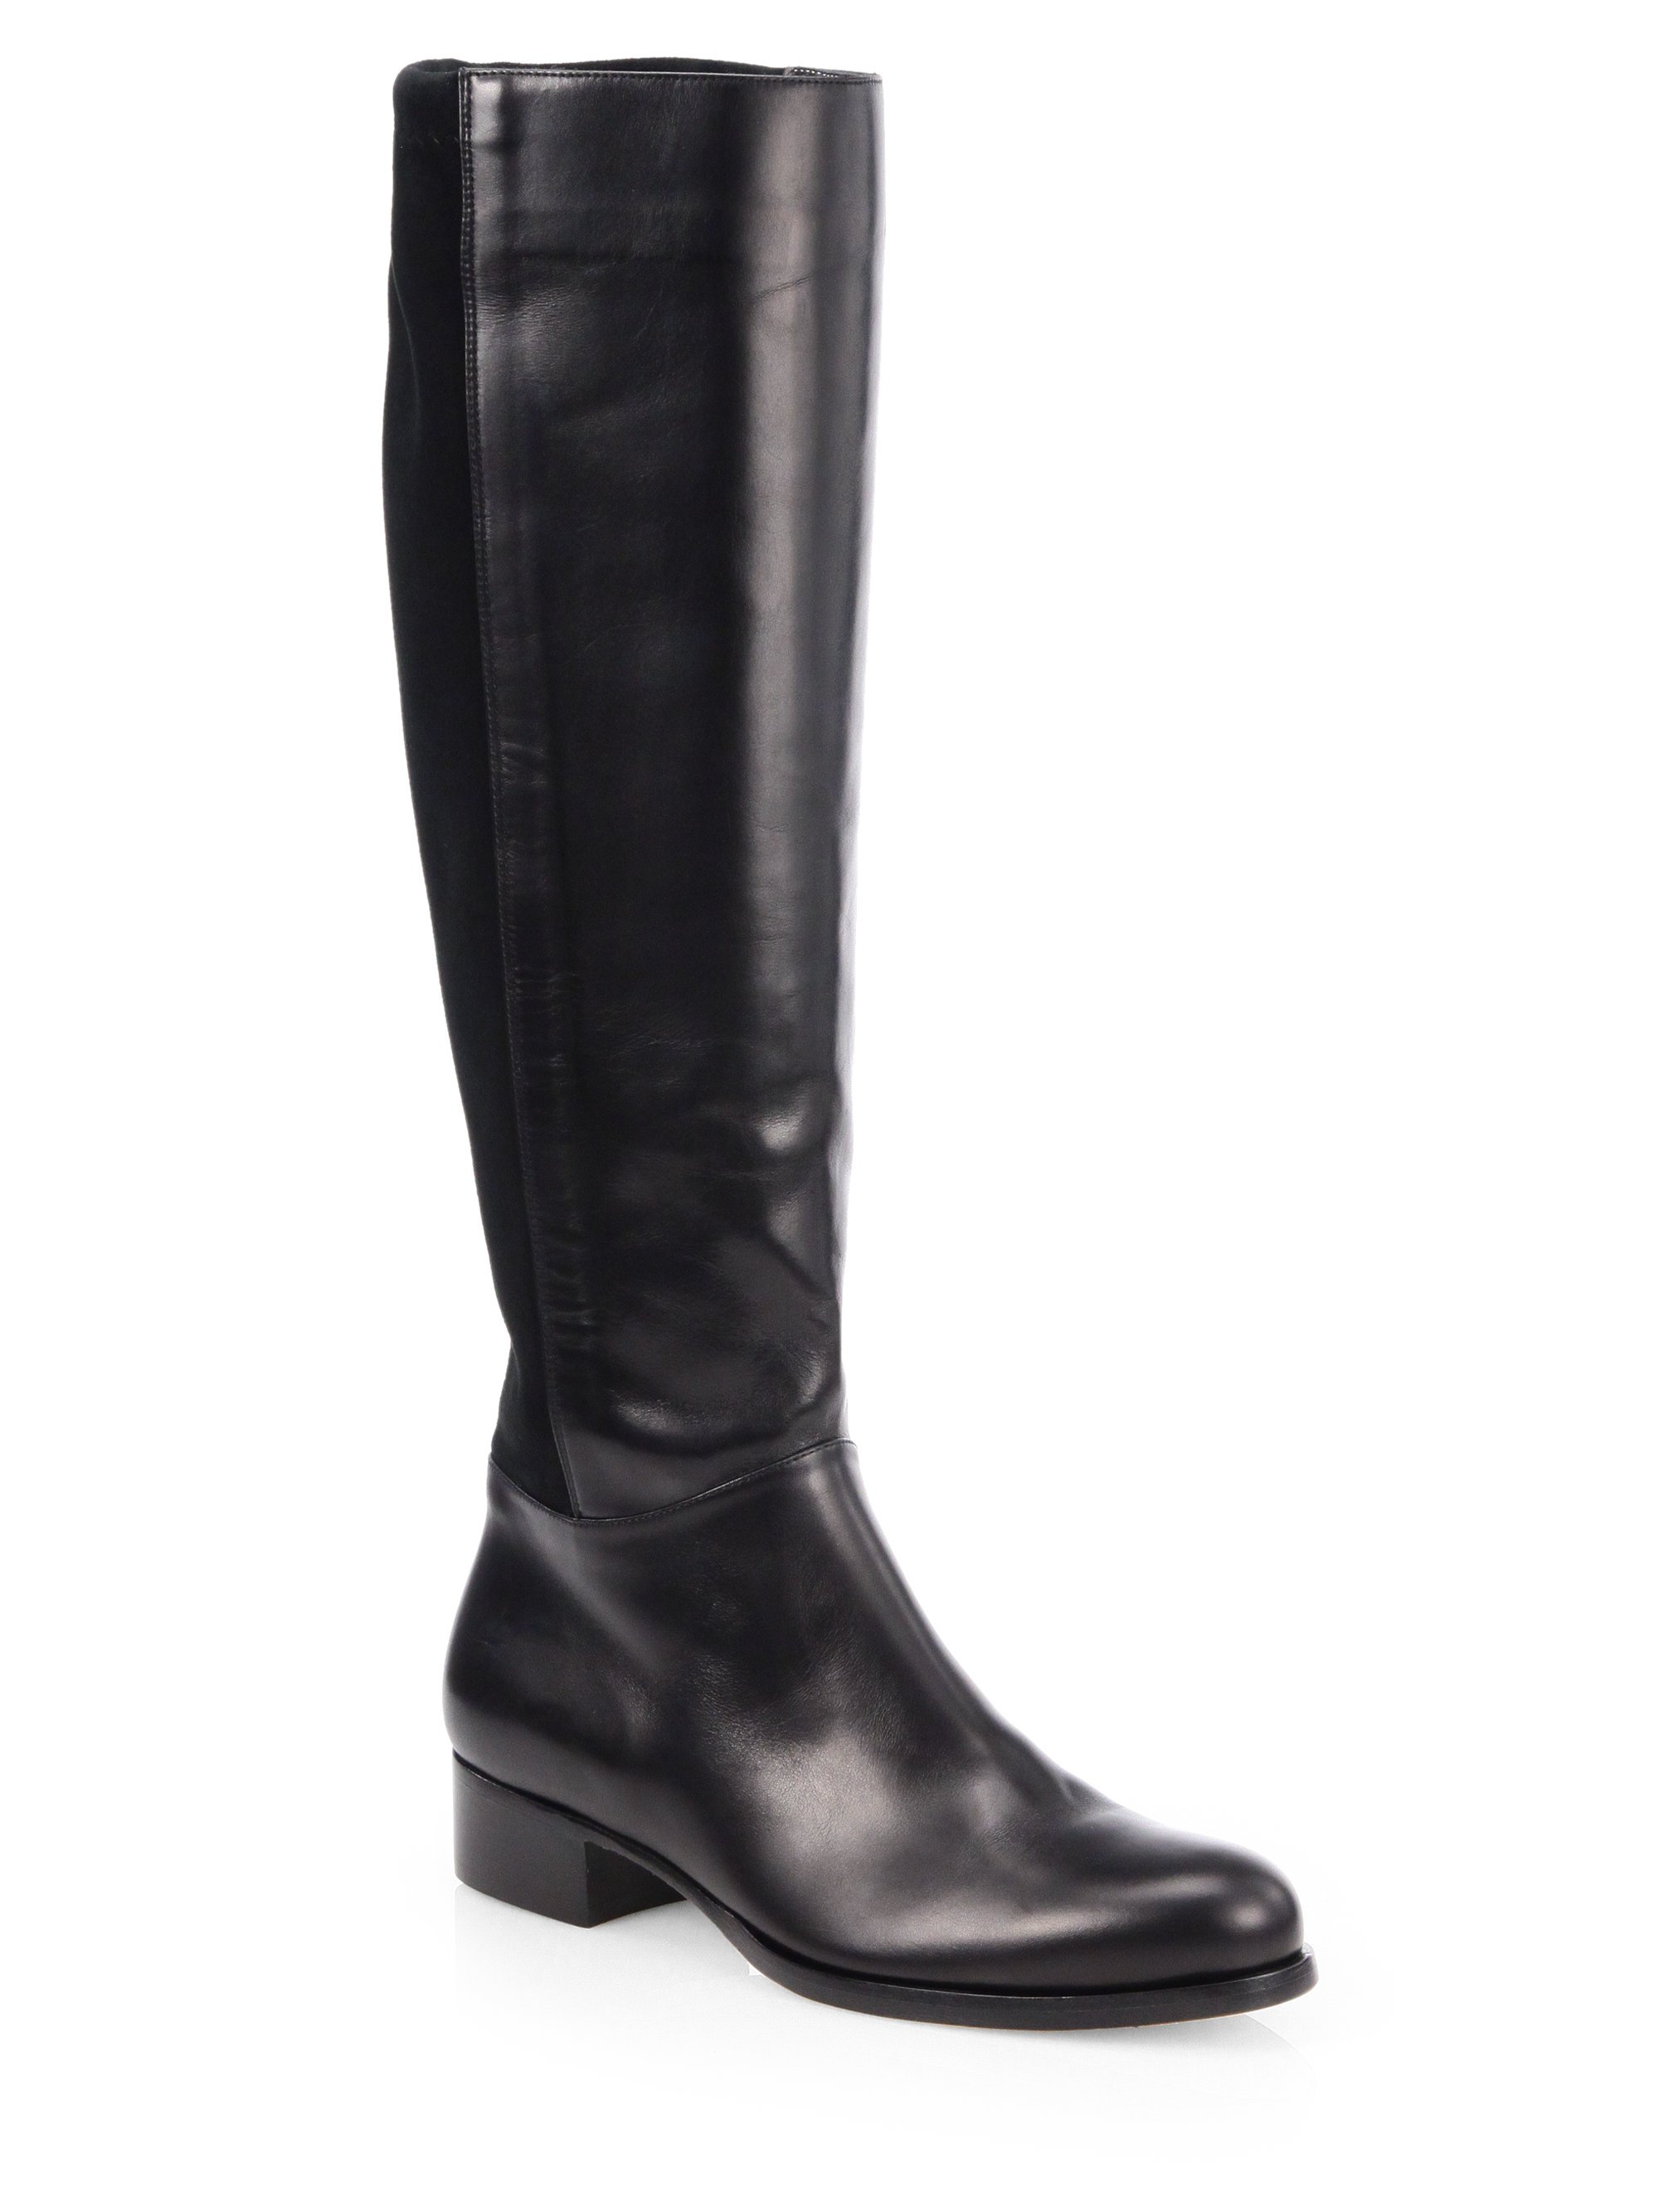 Lyst - Jimmy Choo 50/50 Stretch Leather & Suede Knee-High Boots in Black